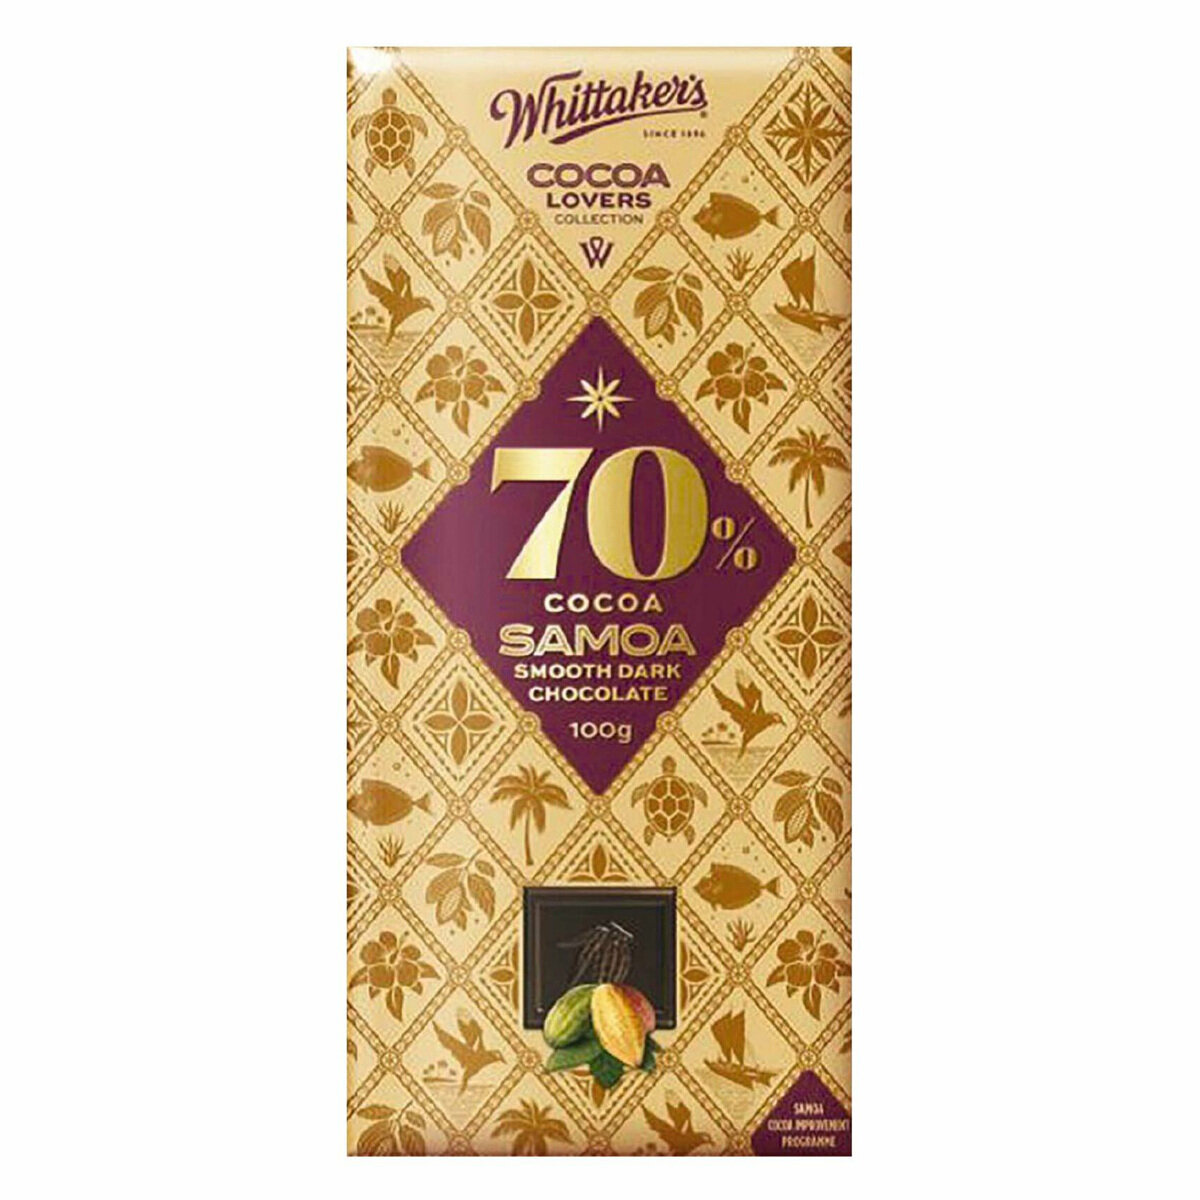 Whittaker's Cocoa Lovers Collection 70% 100G